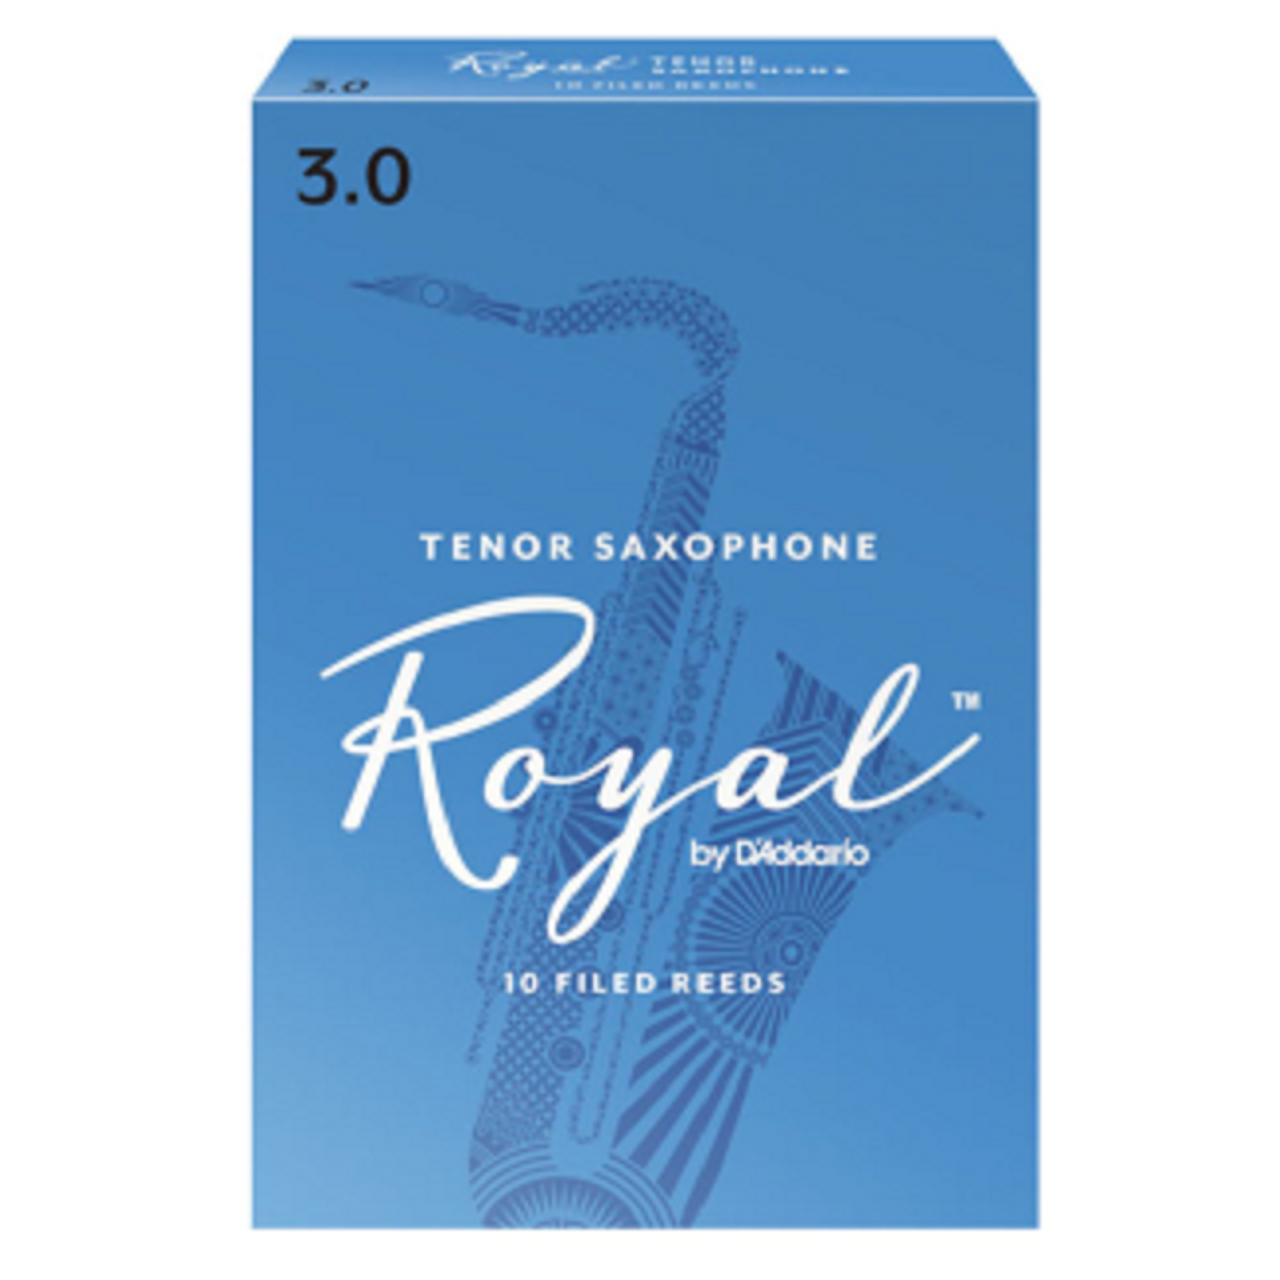 Royal by D'Addario Tenor Sax Reeds, 10-pack